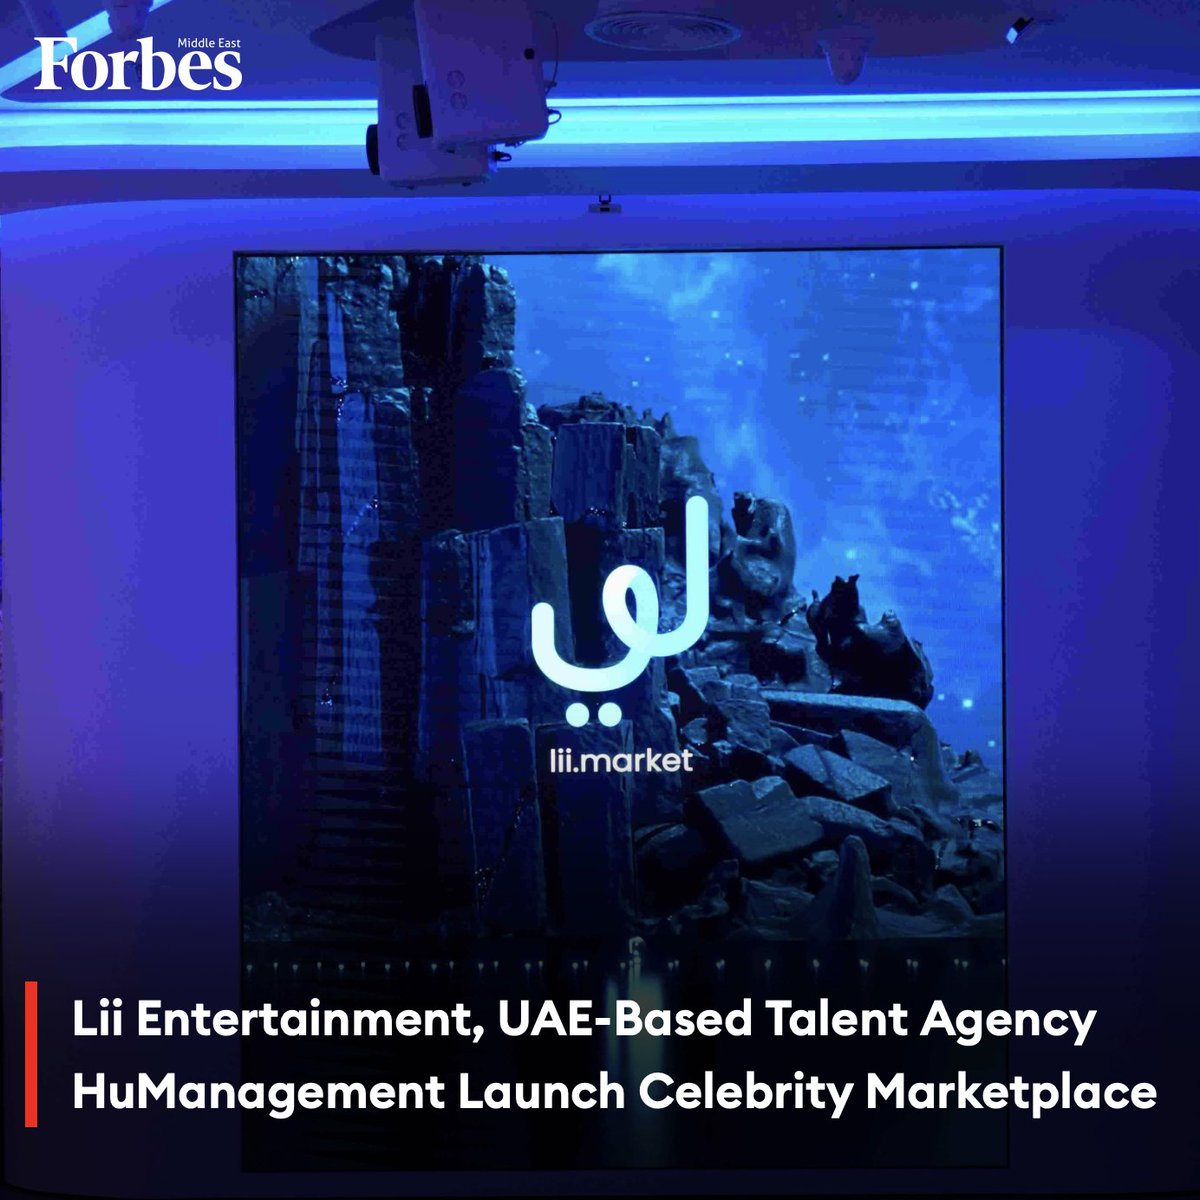 Lii Entertainment, in partnership with the #UAE talent agency HuManagement, recently launched an entertainment marketplace in the #MENA region to connect celebrities with their fans. #Forbes For more details: 🔗 on.forbesmiddleeast.com/8btx